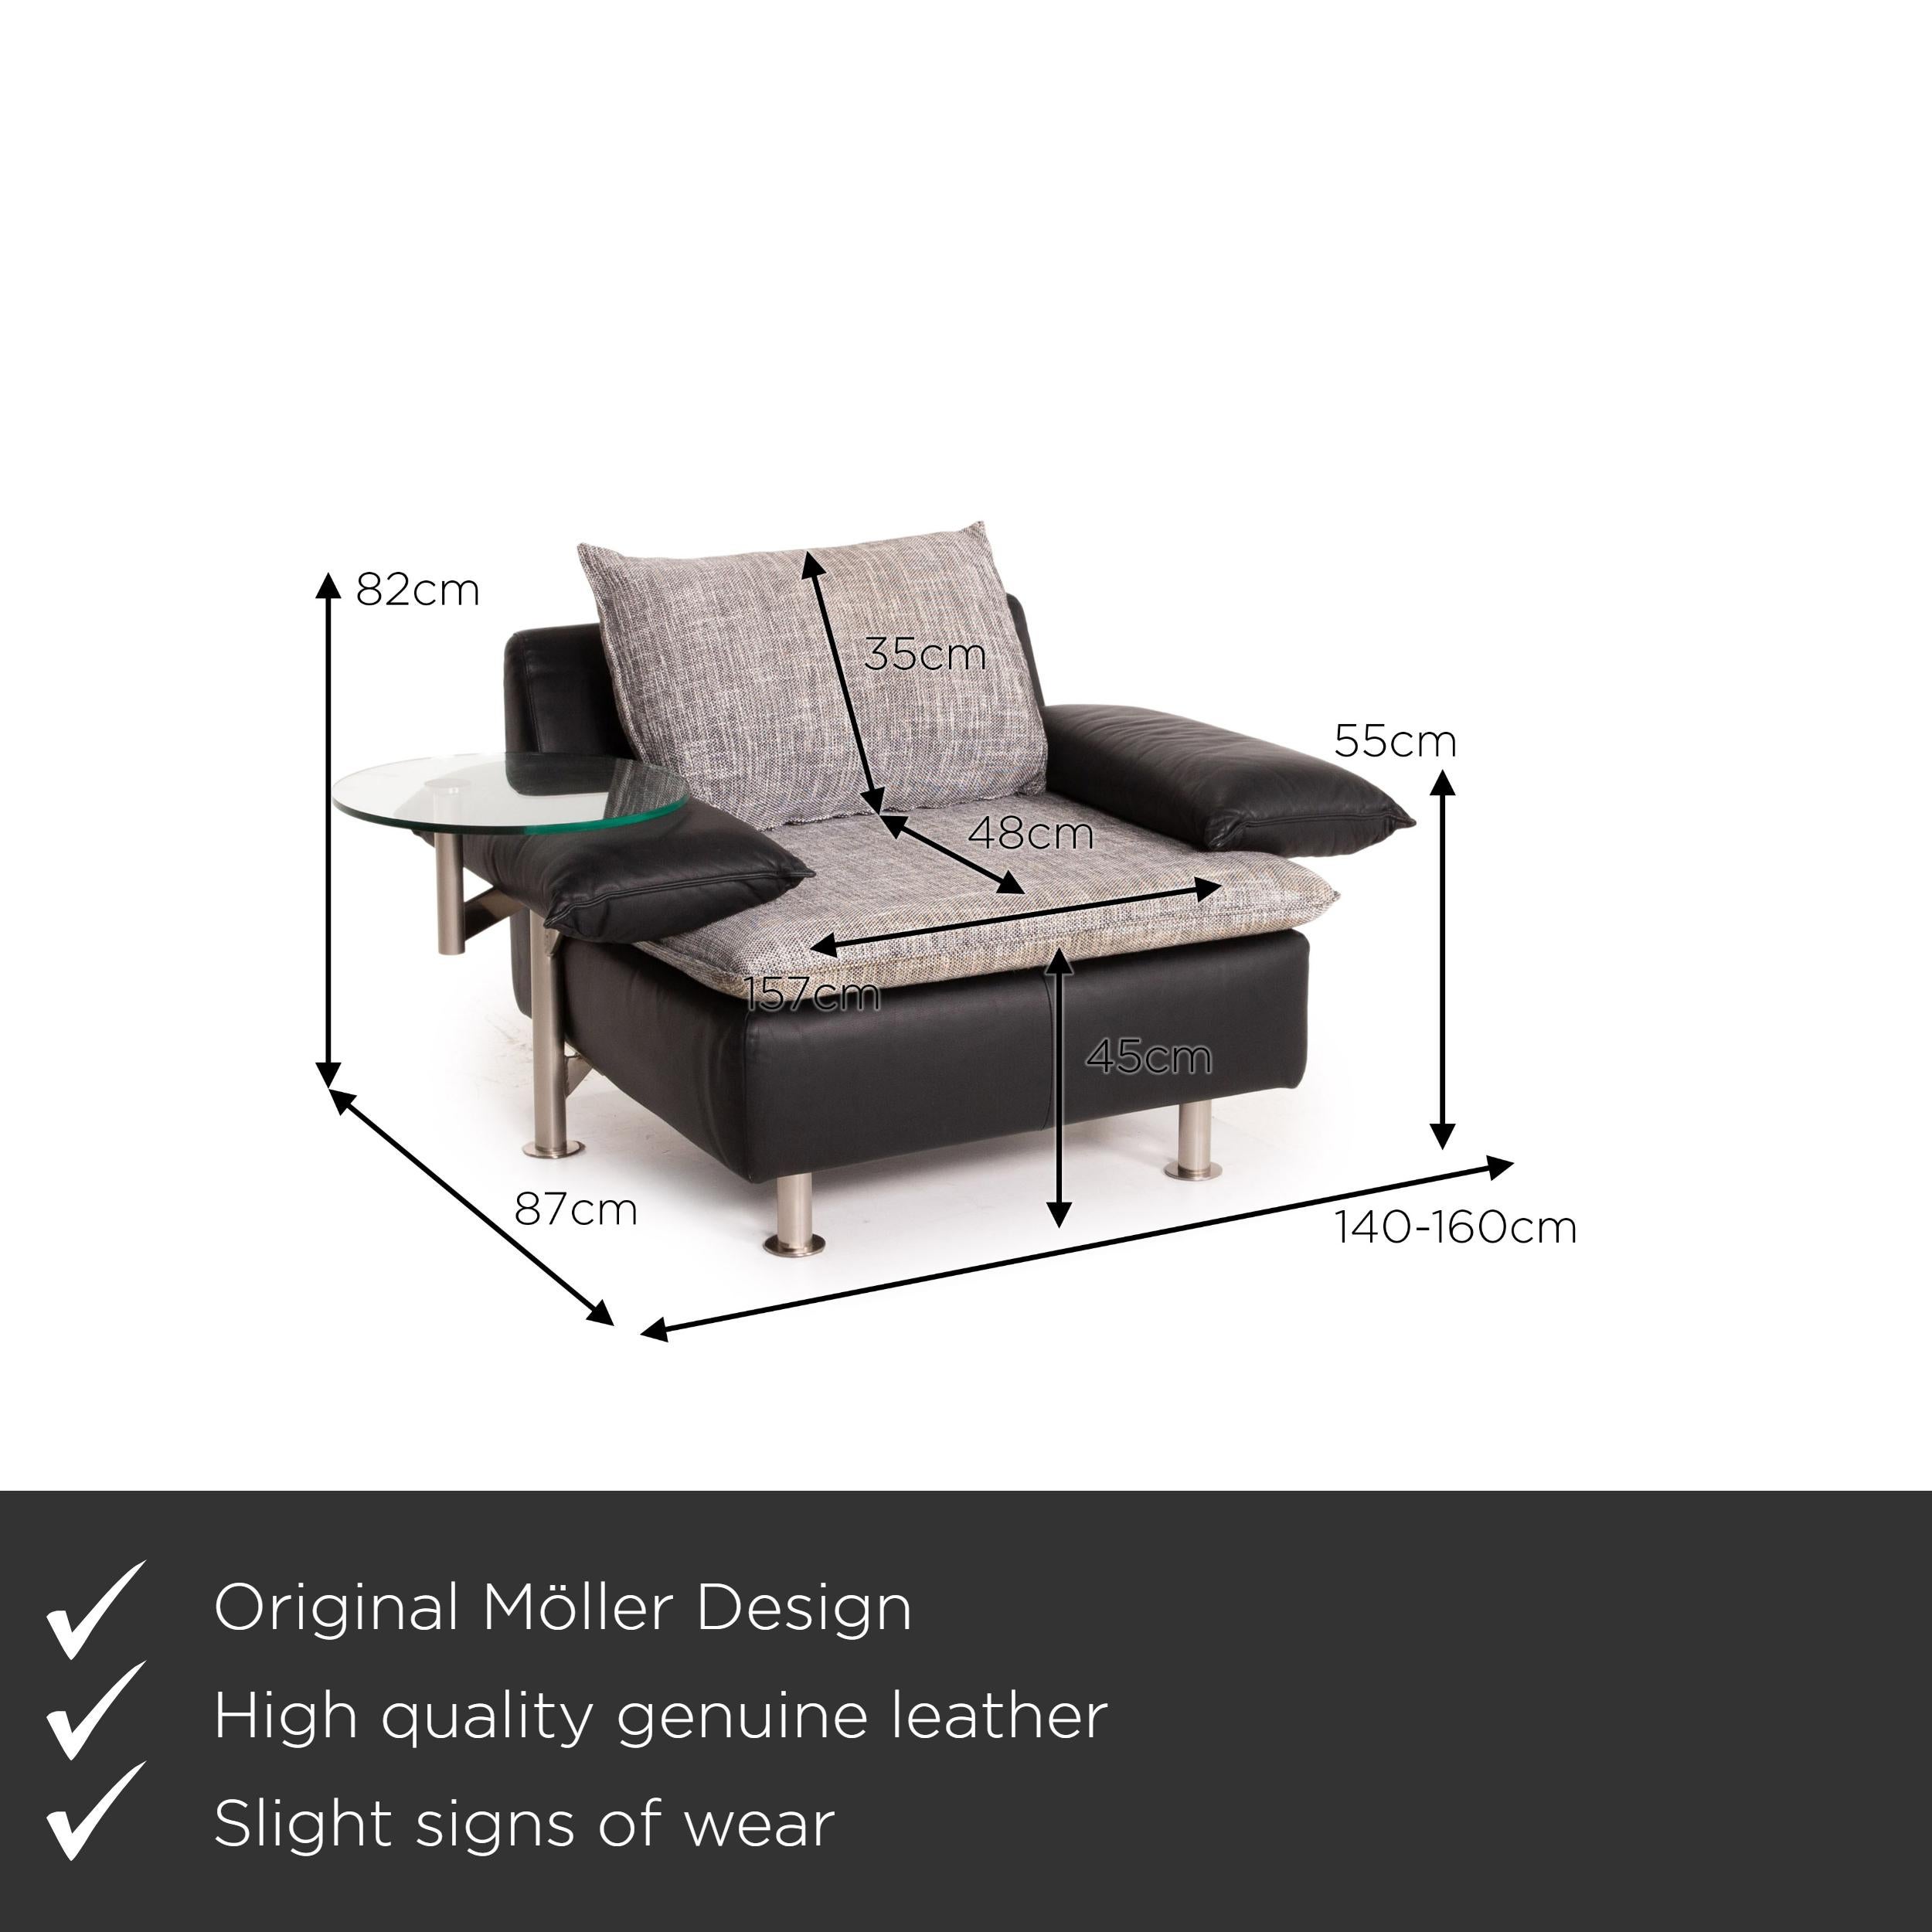 We present to you a Möller Design Tayo leather fabric armchair black gray incl. Glass shelf.
 

 Product measurements in centimeters:
 

Depth 87
Width 140
Height 82
Seat height 45
Rest height 55
Seat depth 48
Seat width 157
Back height